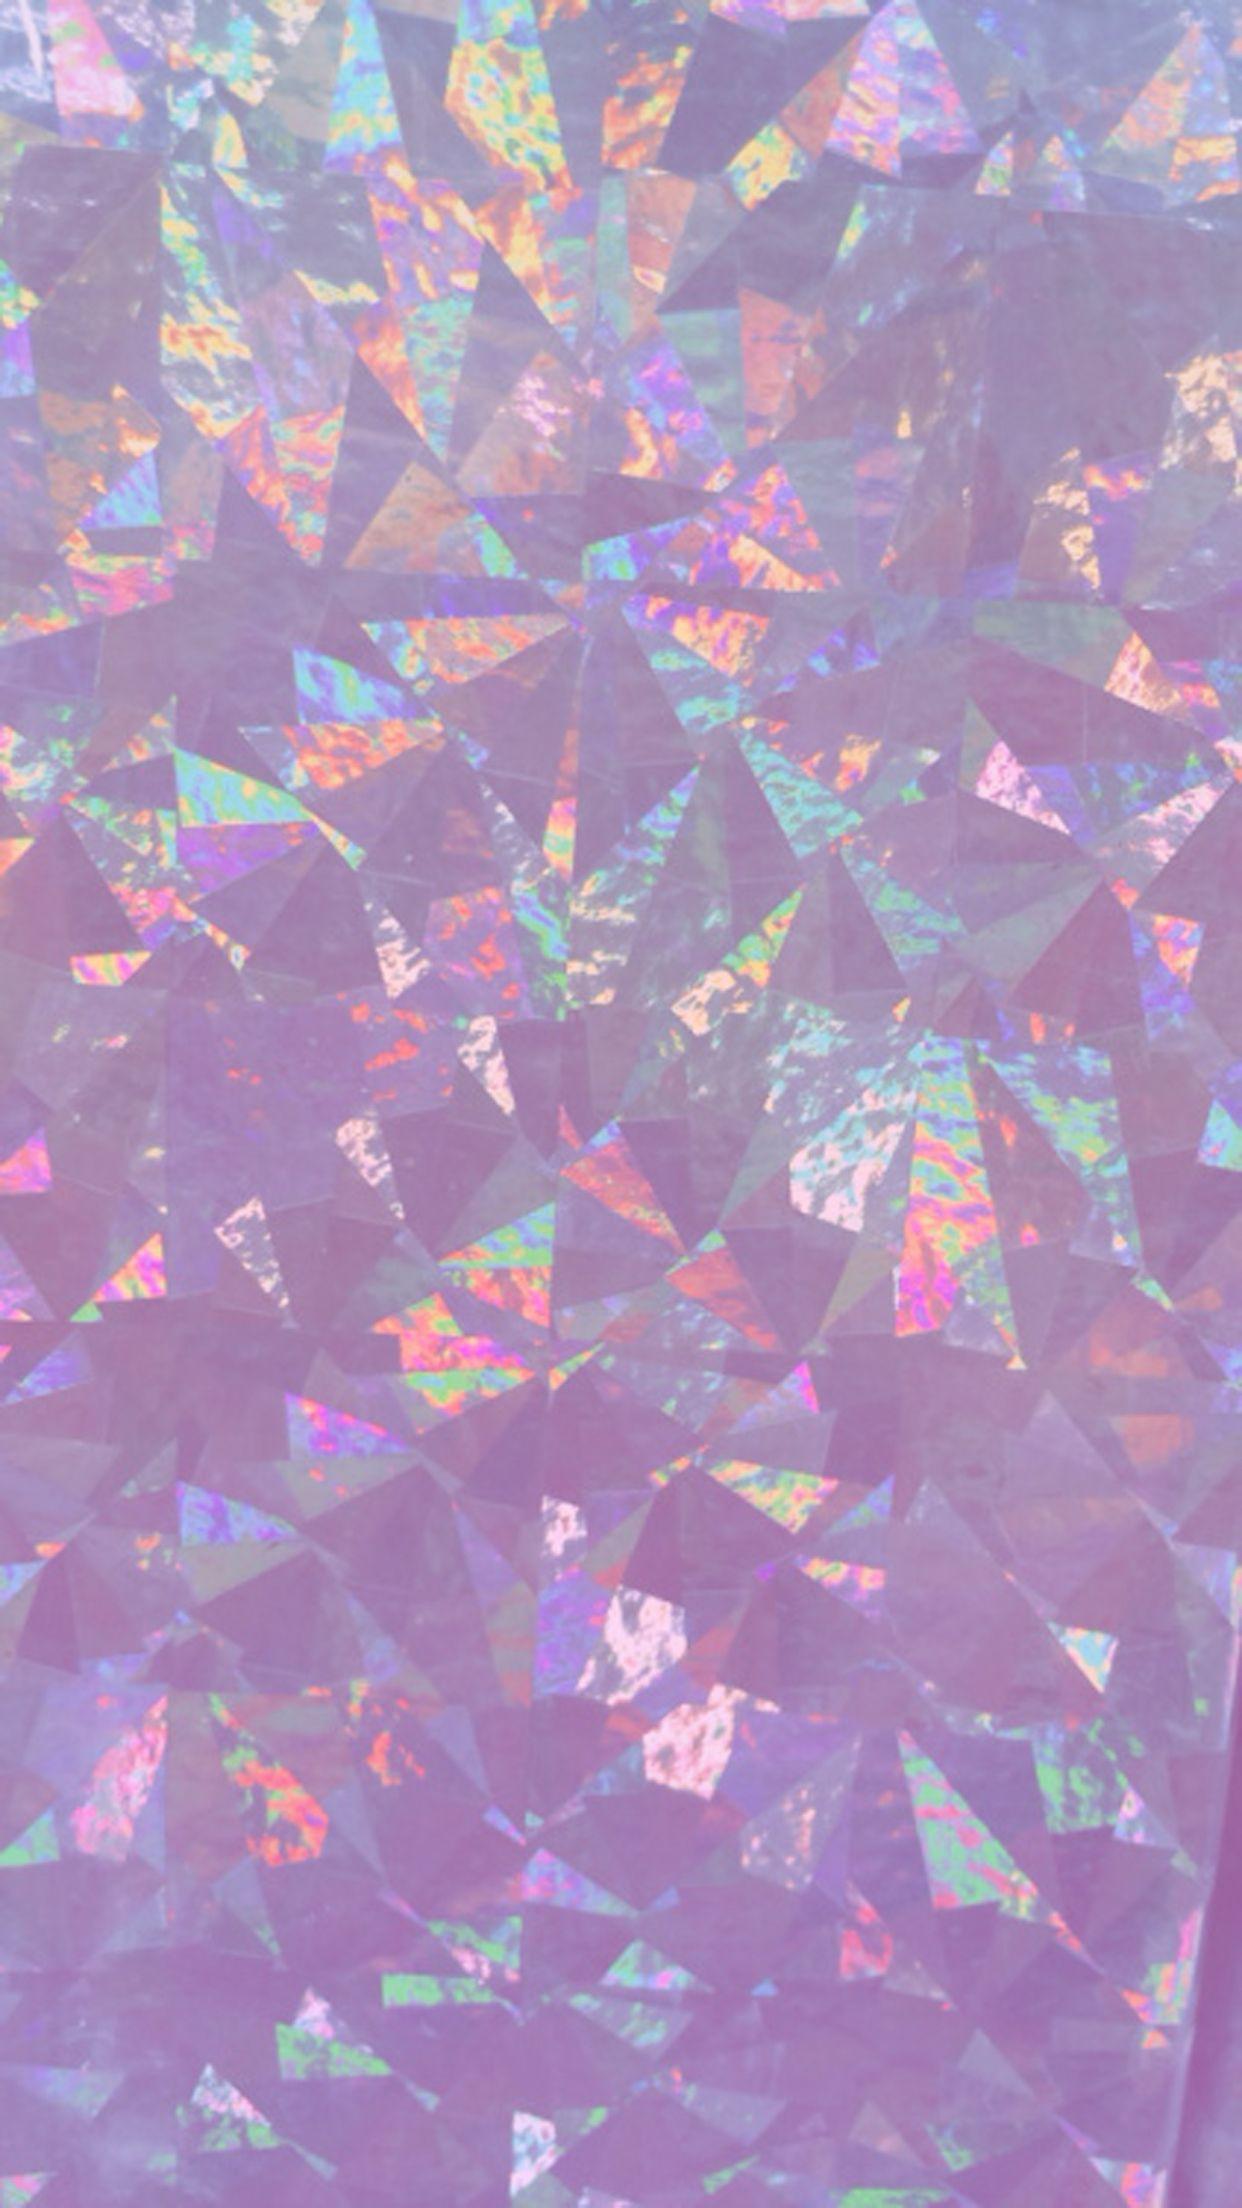 Iridescent Holographic Wallpaper, iPhone, Android, HD, Background